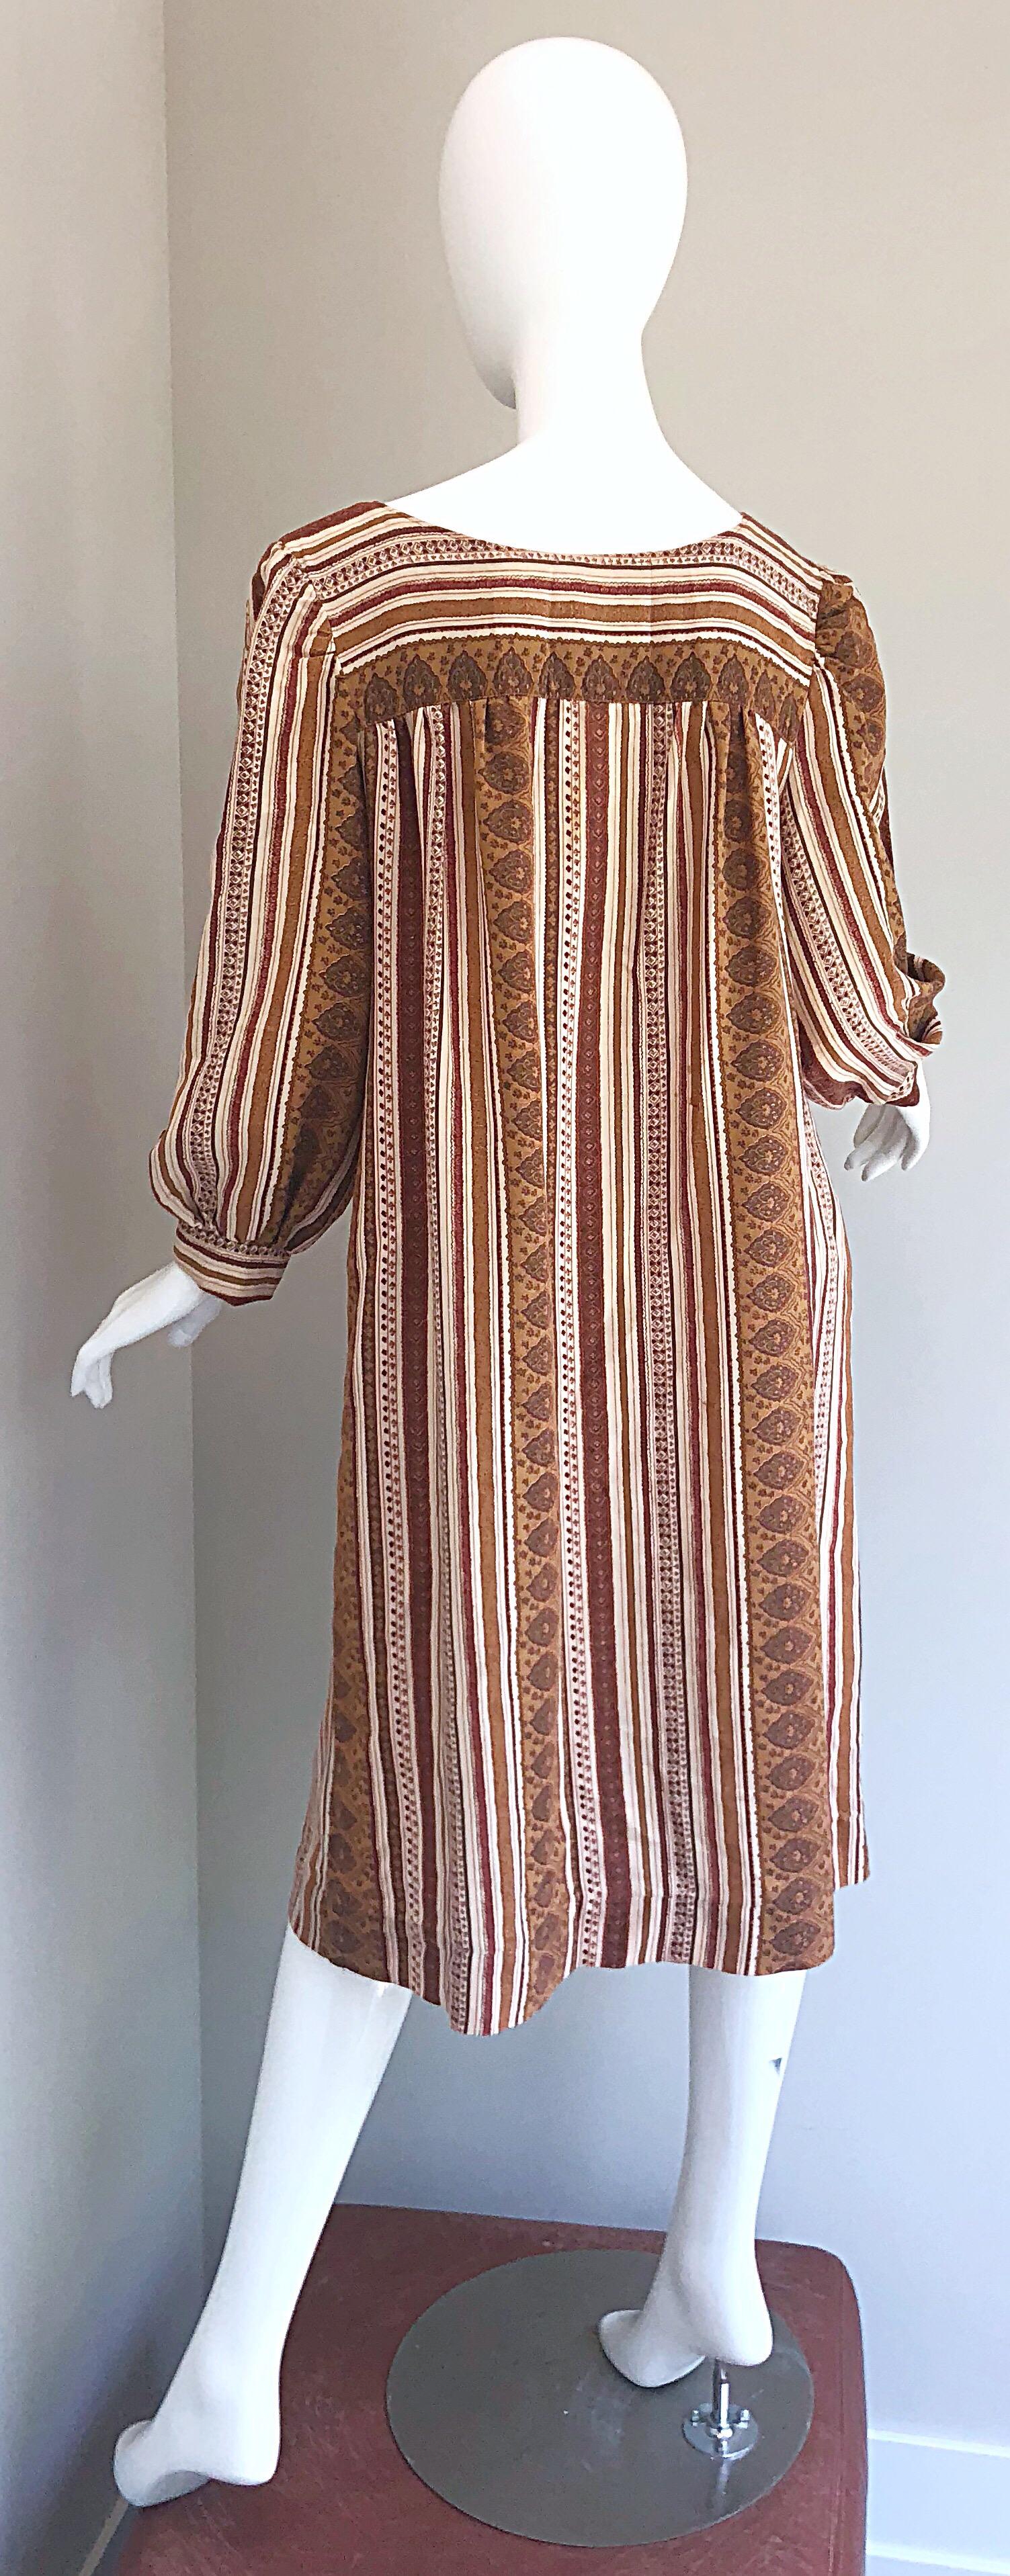 1970s Boho Chic Brown and Ivory Soft Cotton Paisley Print Vintage 70s Dress 3